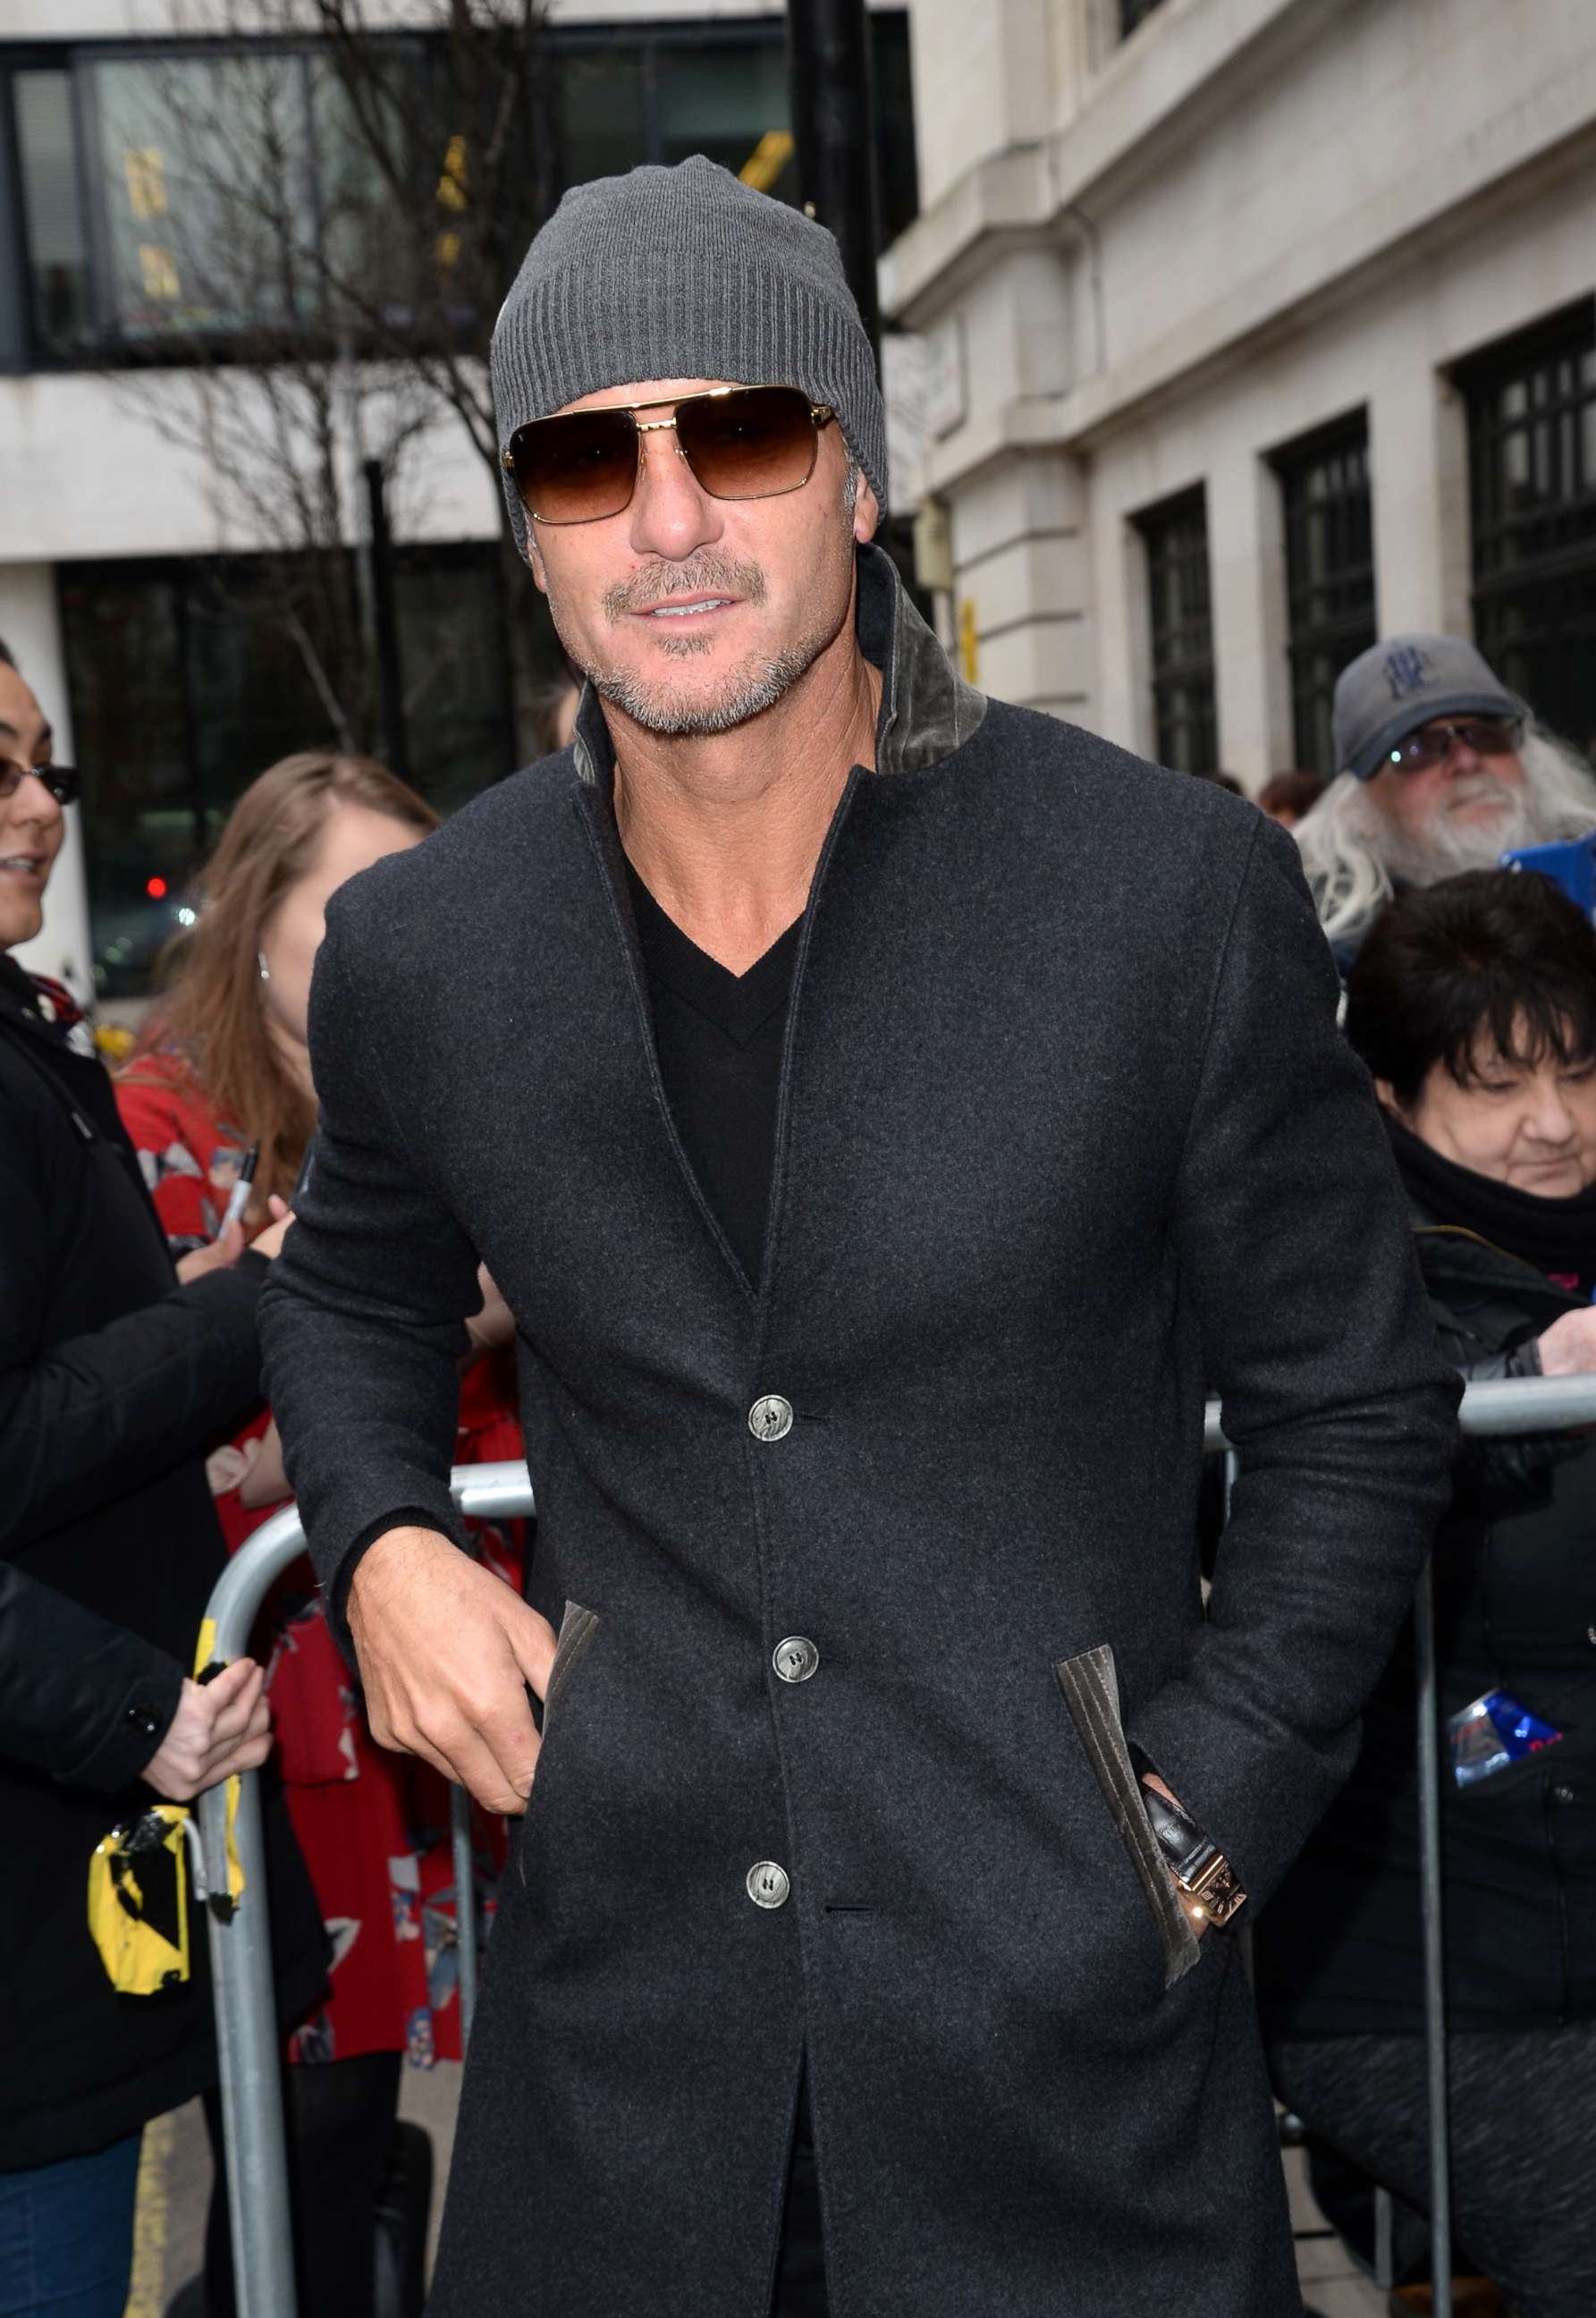 PHOTO: Tim McGraw is seen leaving The BBC, March 8, 2018 in London.